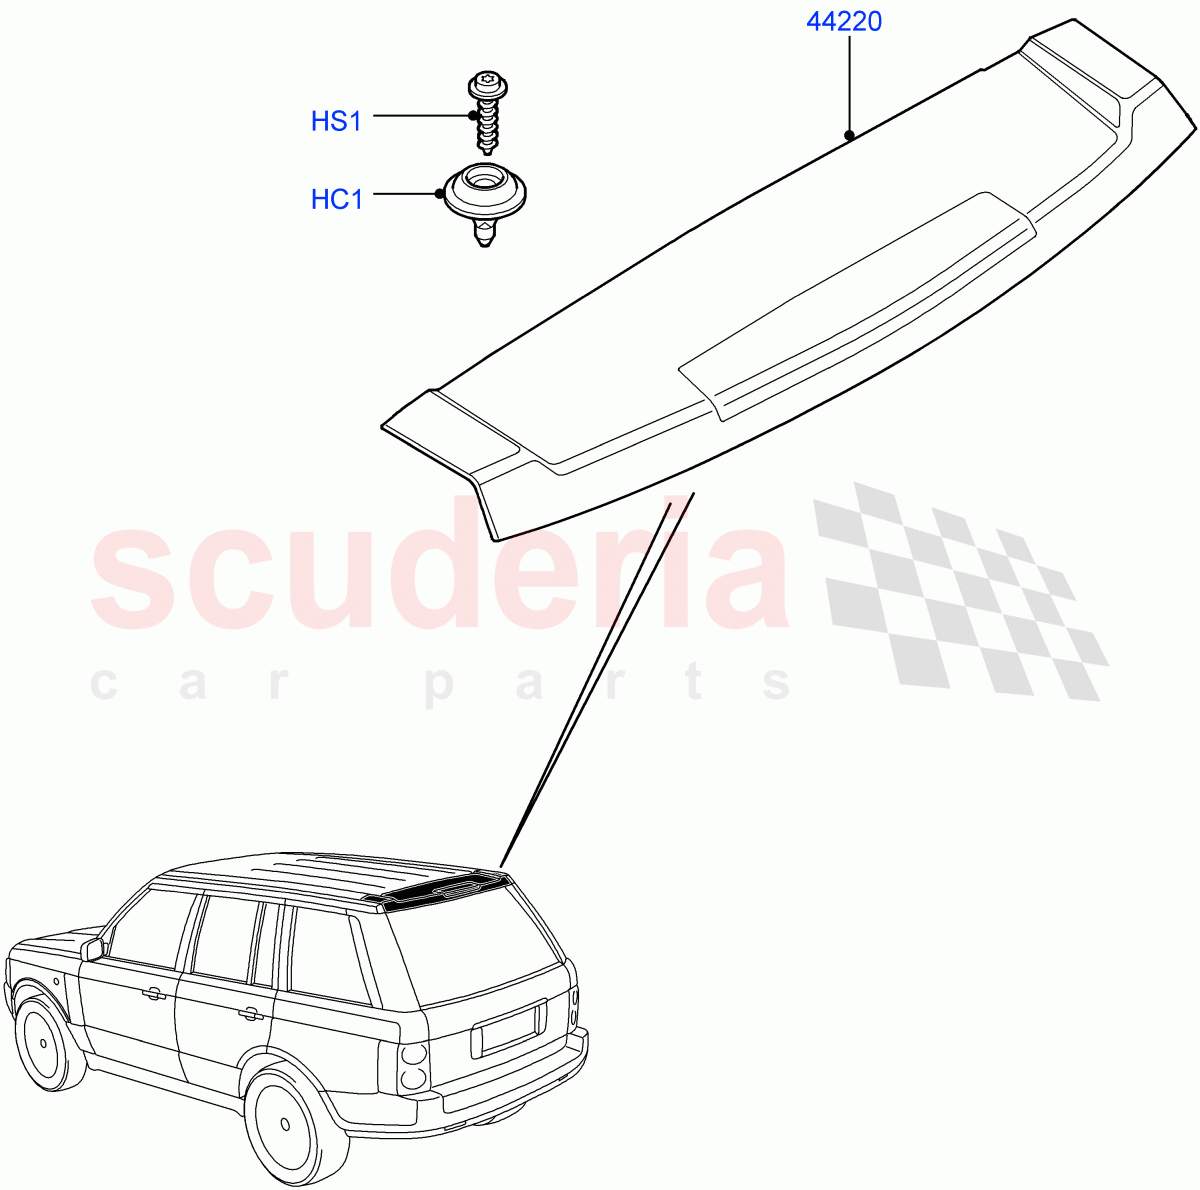 Spoiler And Related Parts((V)FROMAA000001) of Land Rover Land Rover Range Rover (2010-2012) [5.0 OHC SGDI NA V8 Petrol]